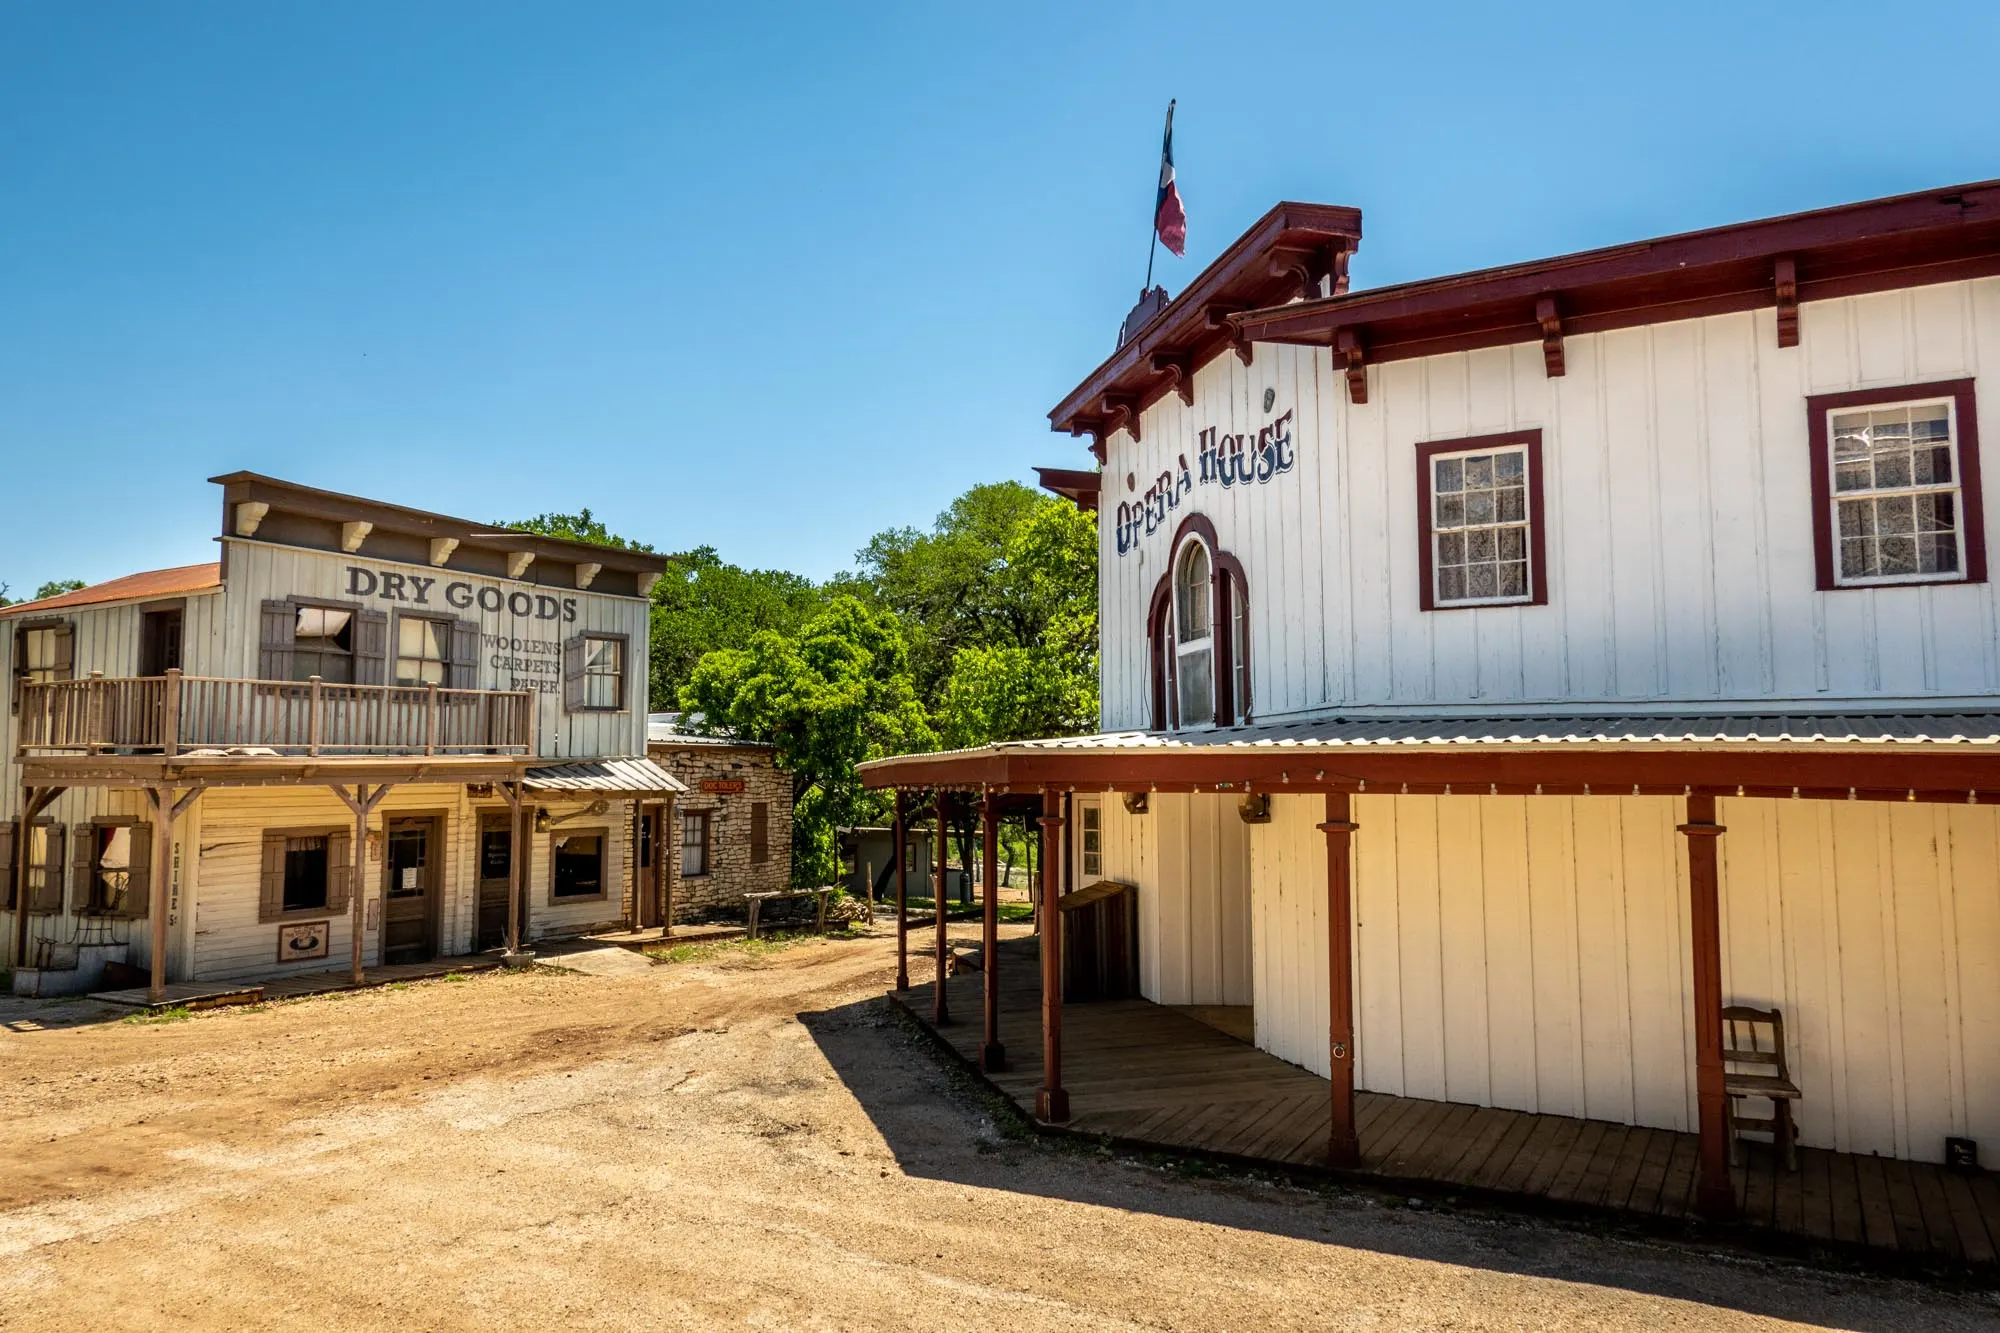 Replica Western town with a dry goods store and an opera house